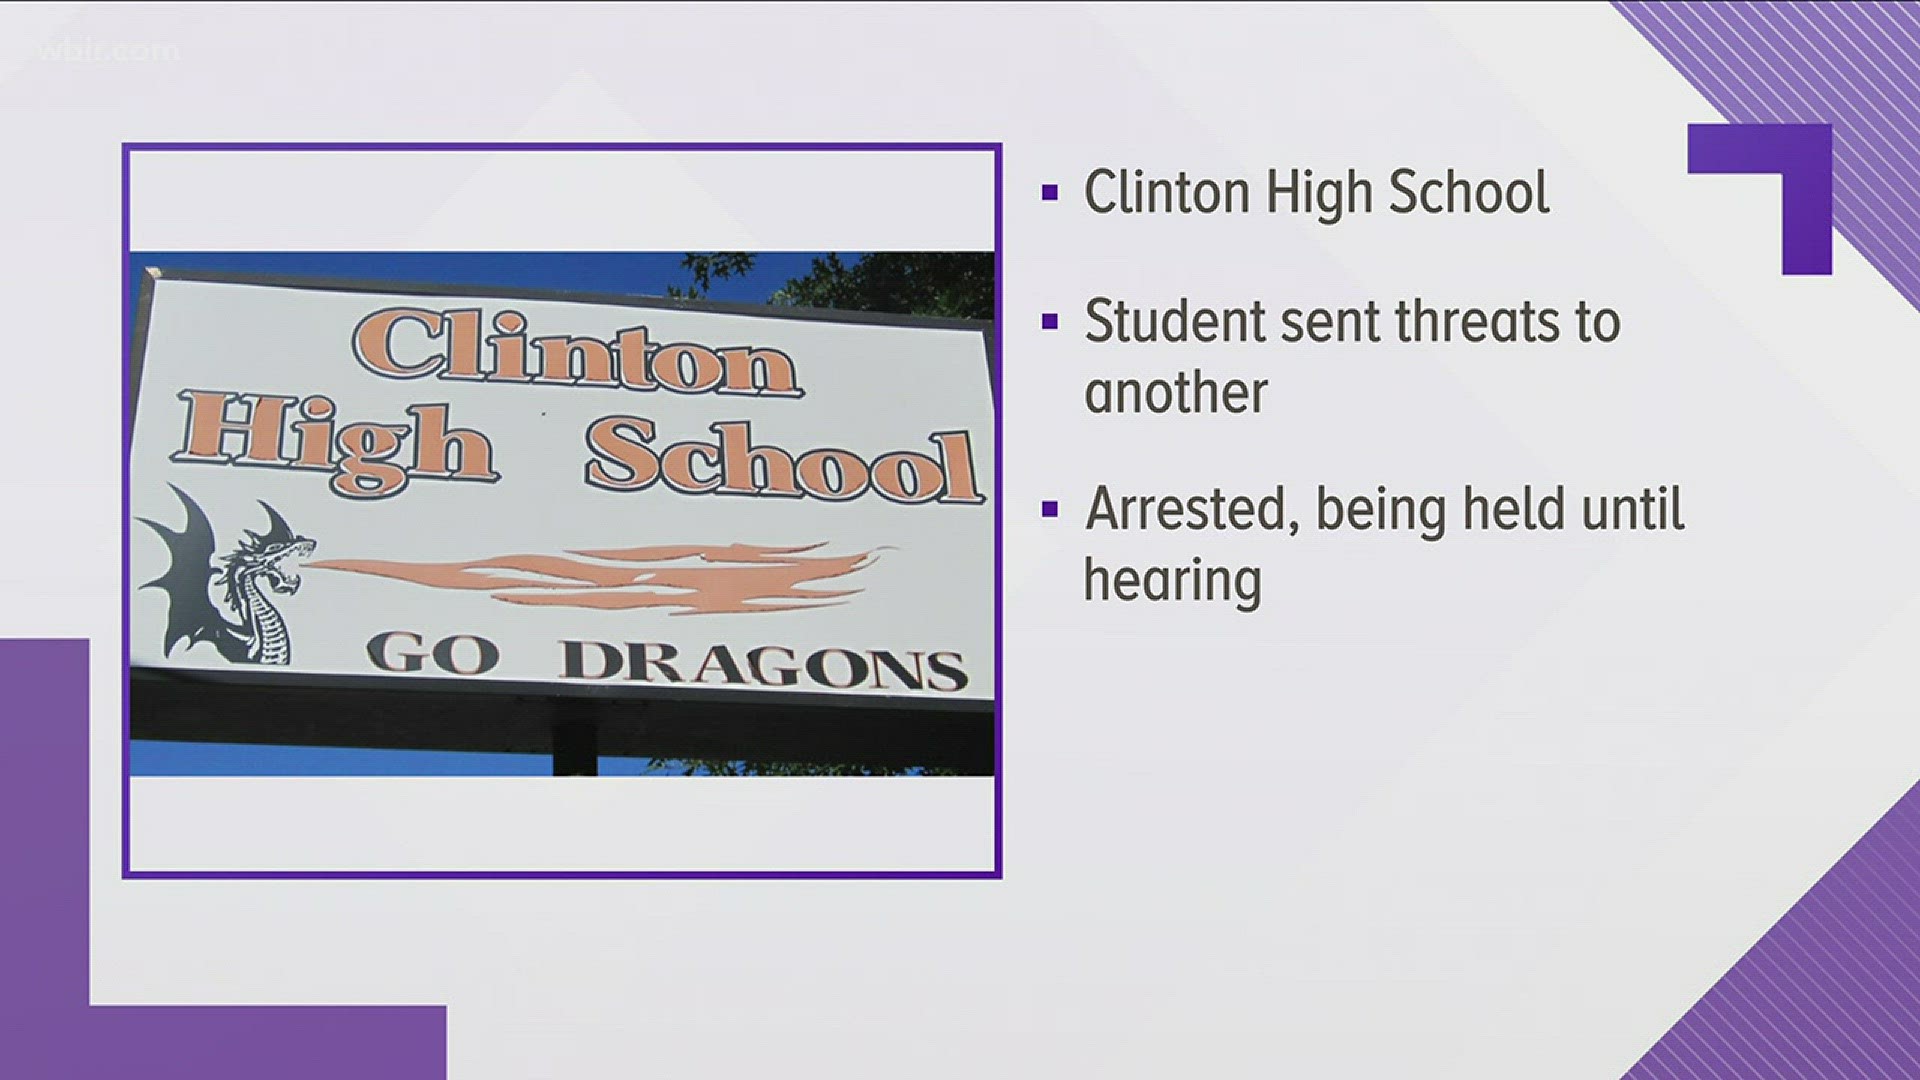 Two Anderson County teens are charged with making threats to their schools, one at Roberstville Middle School and one at Clinton High School